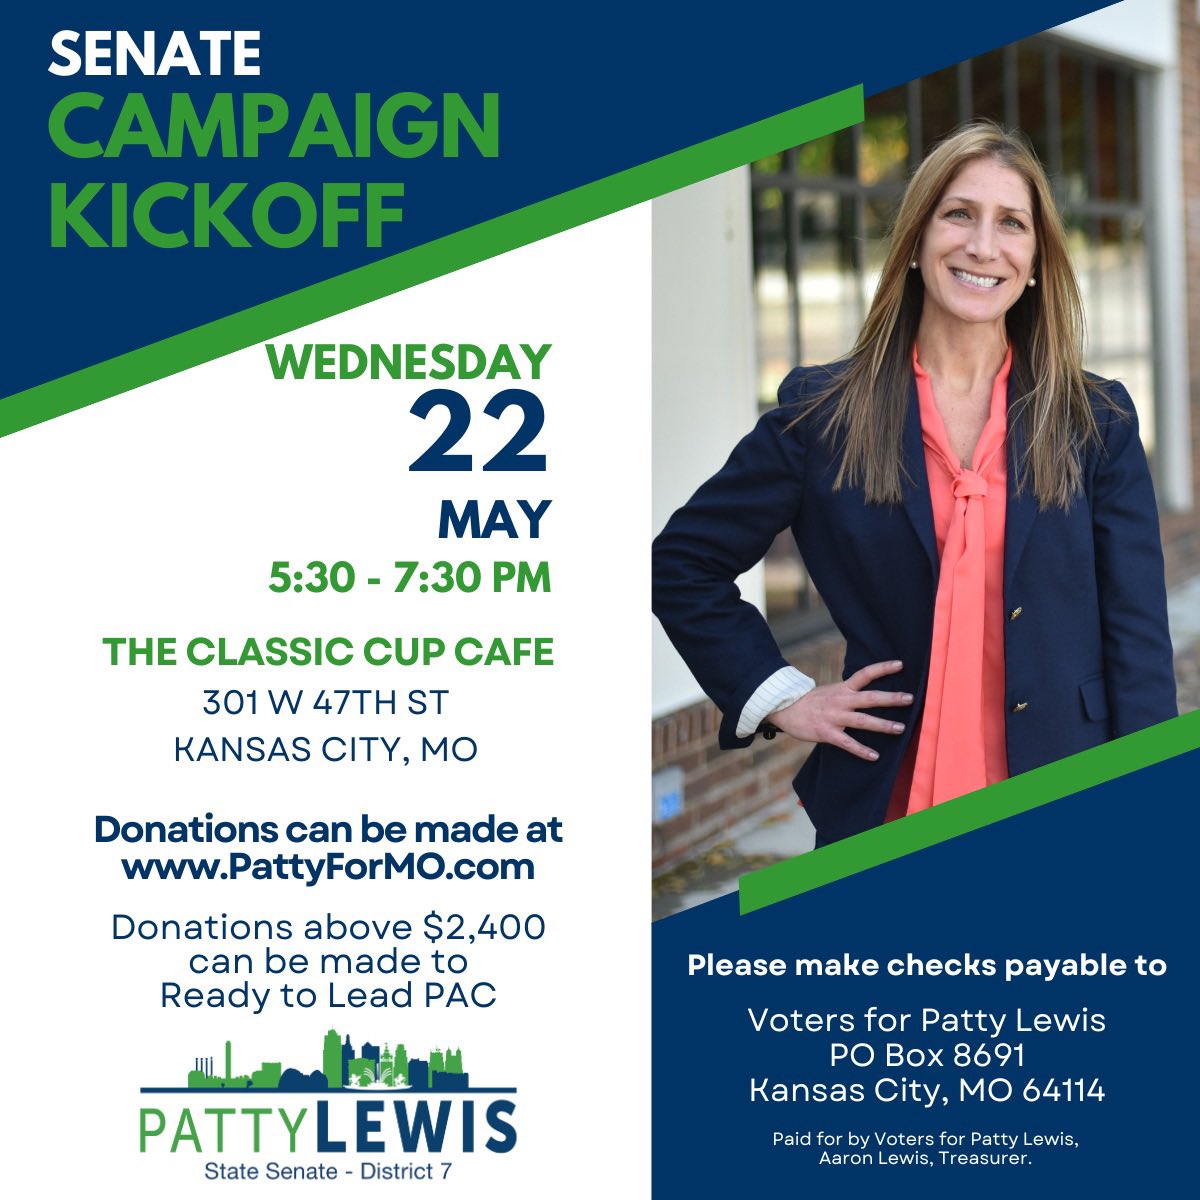 Hope you will join me tomorrow for our State Senate District 7 Campaign Kickoff at The Classic Cup Cafe, 301 W 47th St, KC, MO. Bring your family, friends and neighbors. The more the merrier! See ya tomorrow. #MOLeg #MOSen #Patty4MO